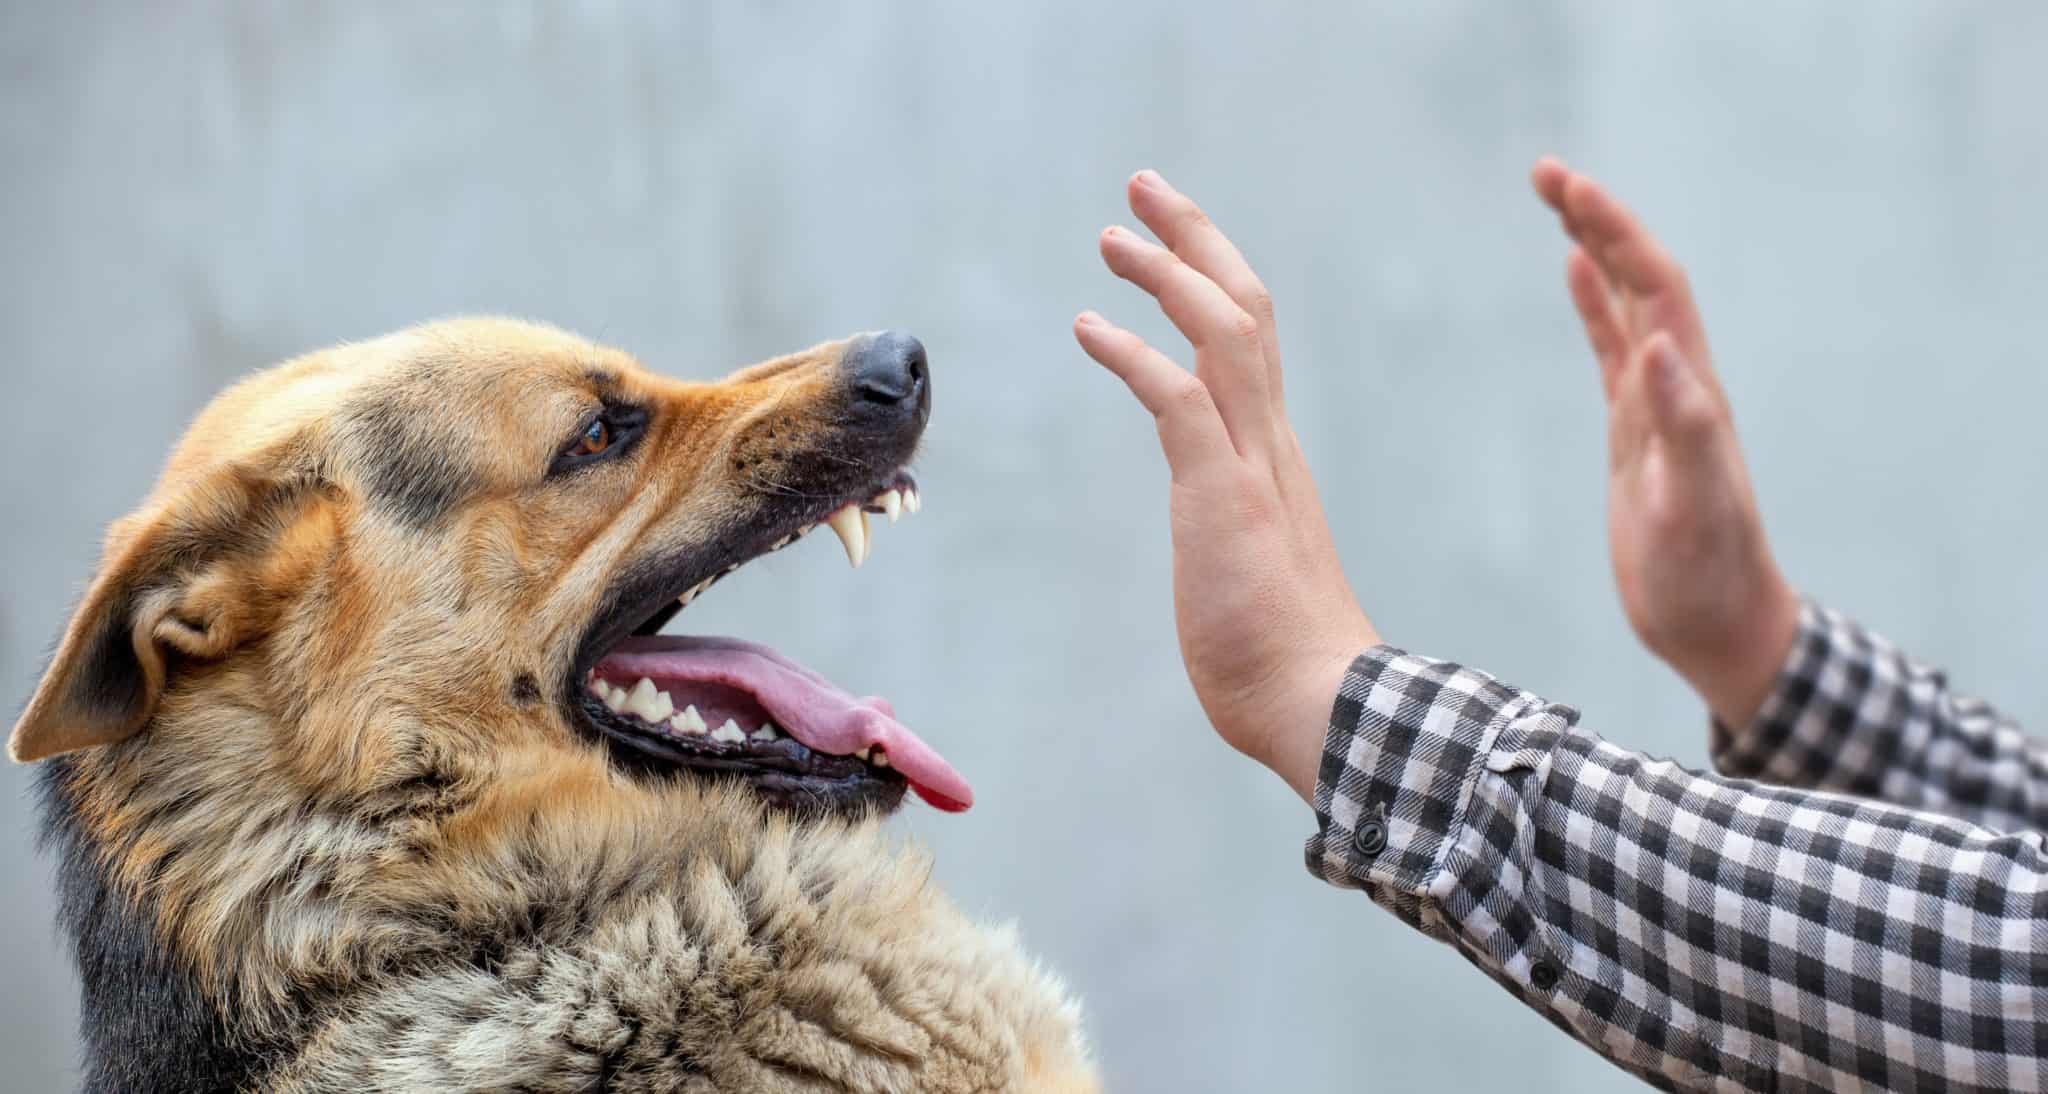 Dog biting: Understand why your dog might bite to prevent it